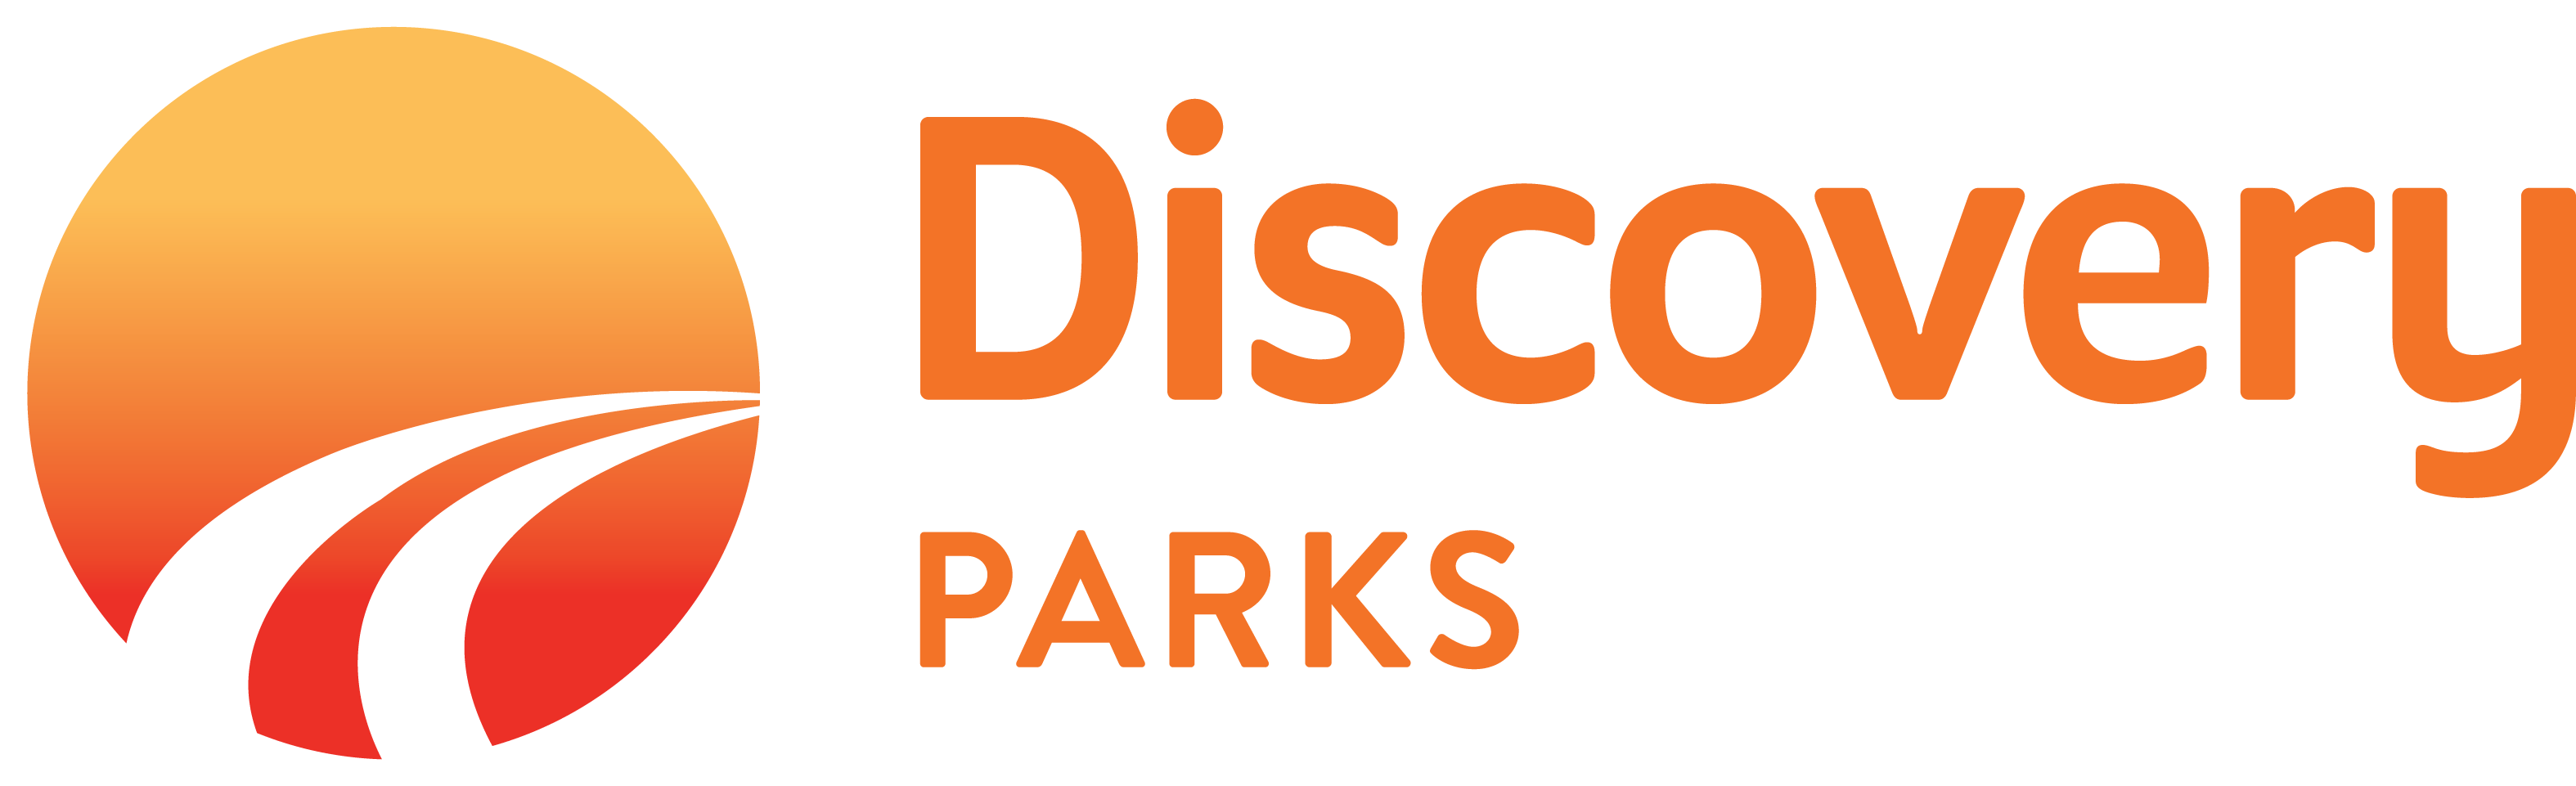 Discovery parks media release logo